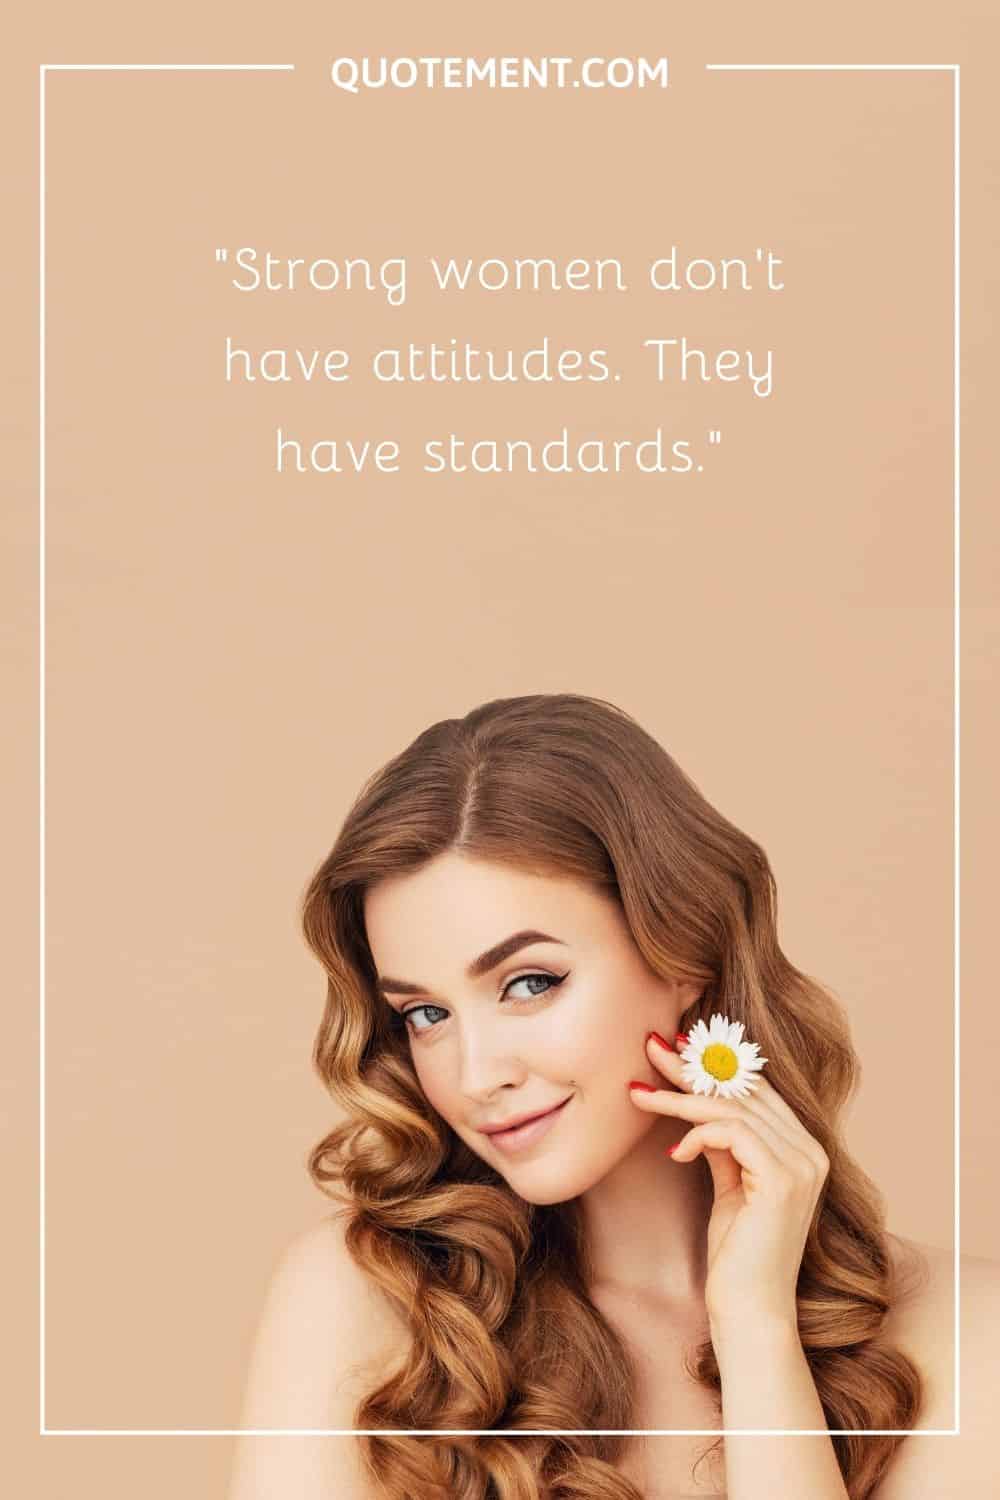 Strong women don't have attitudes.